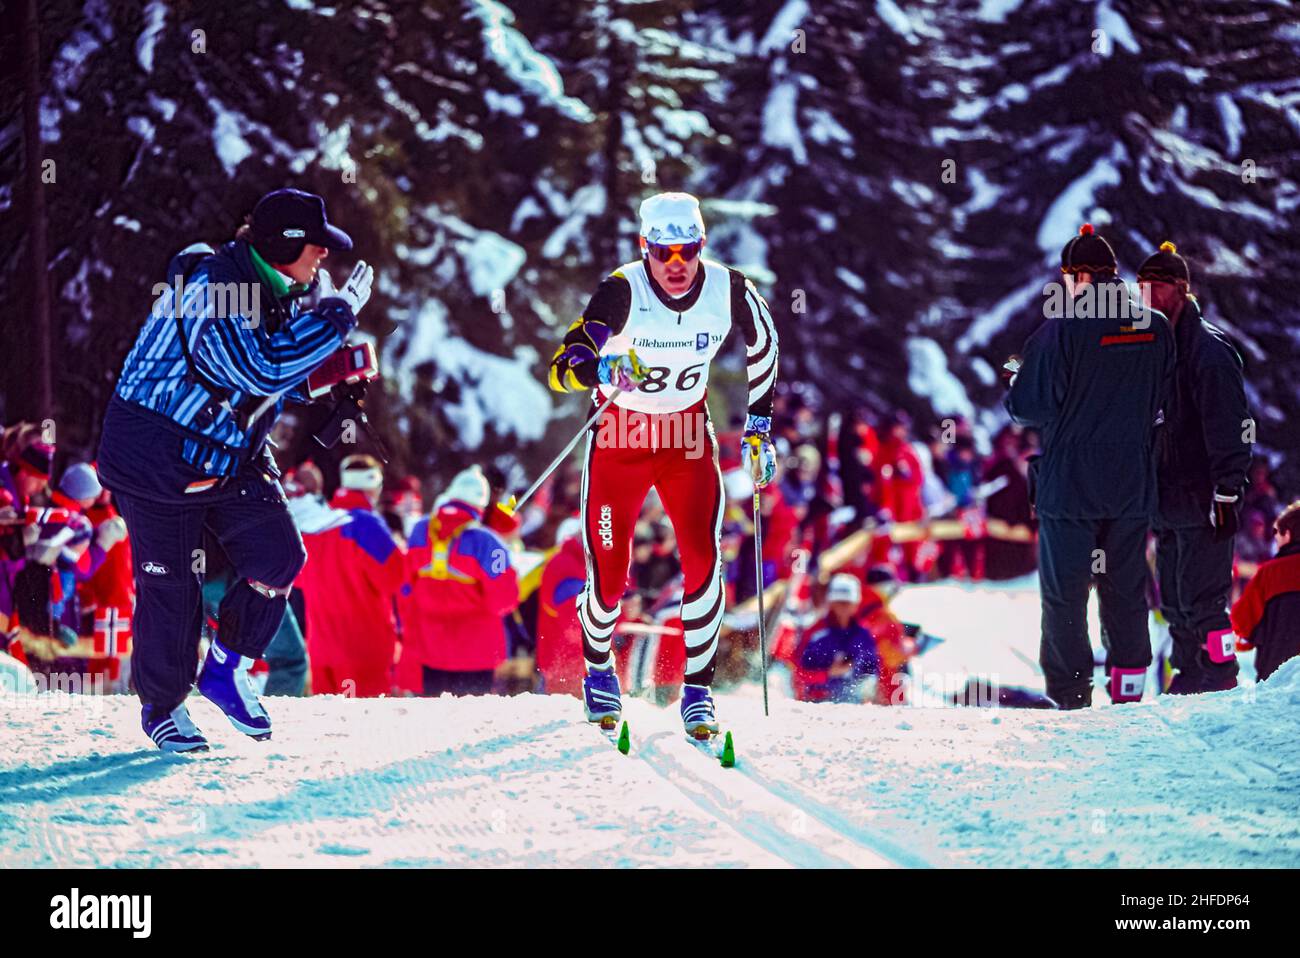 Vladimir Smirnov (KAZ) competing in the men's 10km cross country skiing at the 1994 Olympic Winter Games. Stock Photo